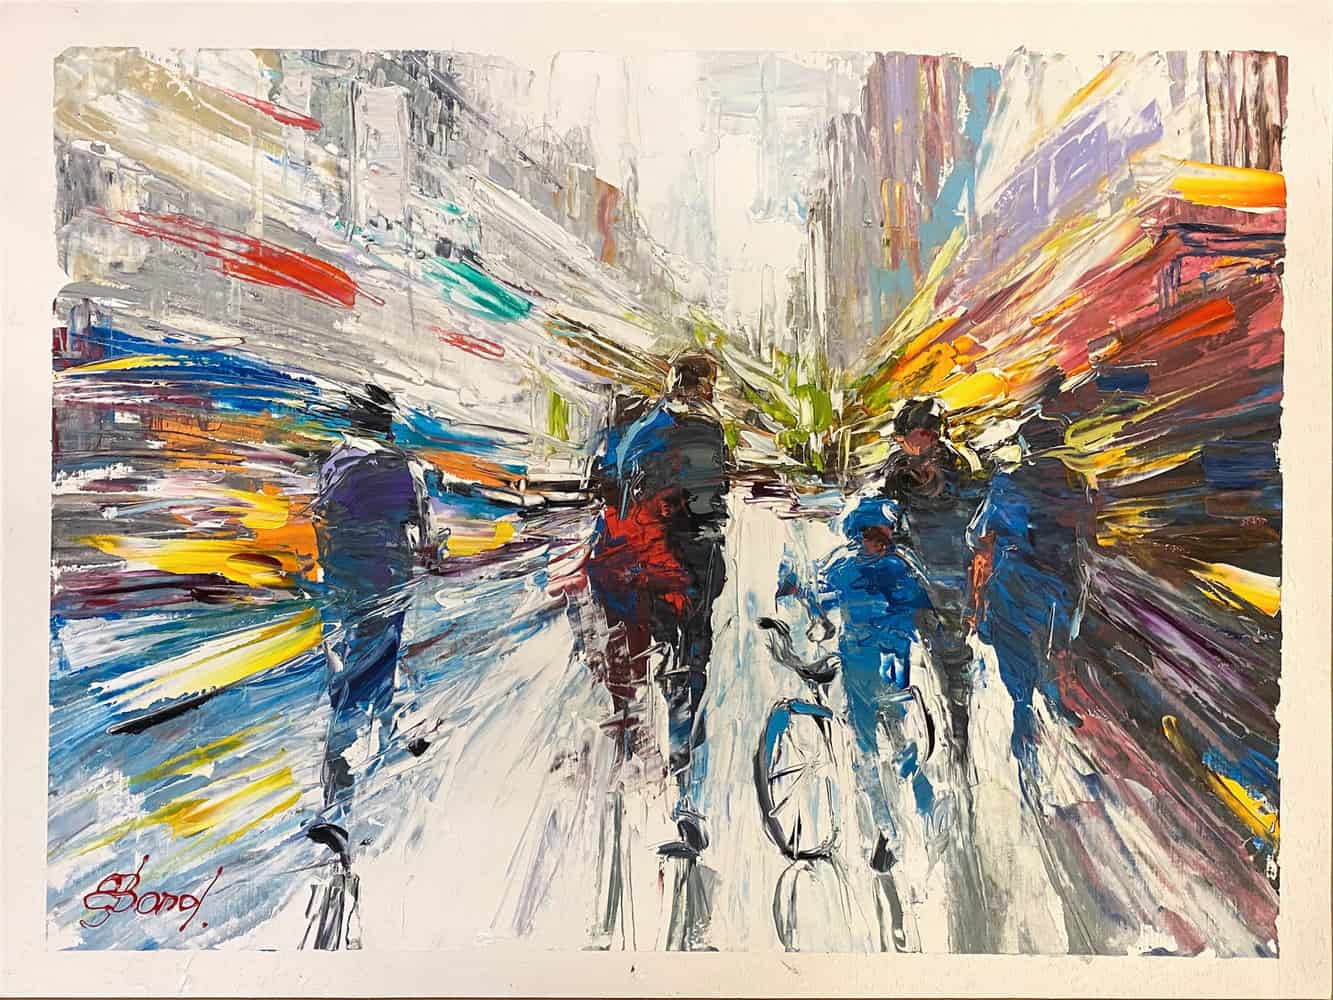 Buy a painting of a bike and people called The Path I've Chosen